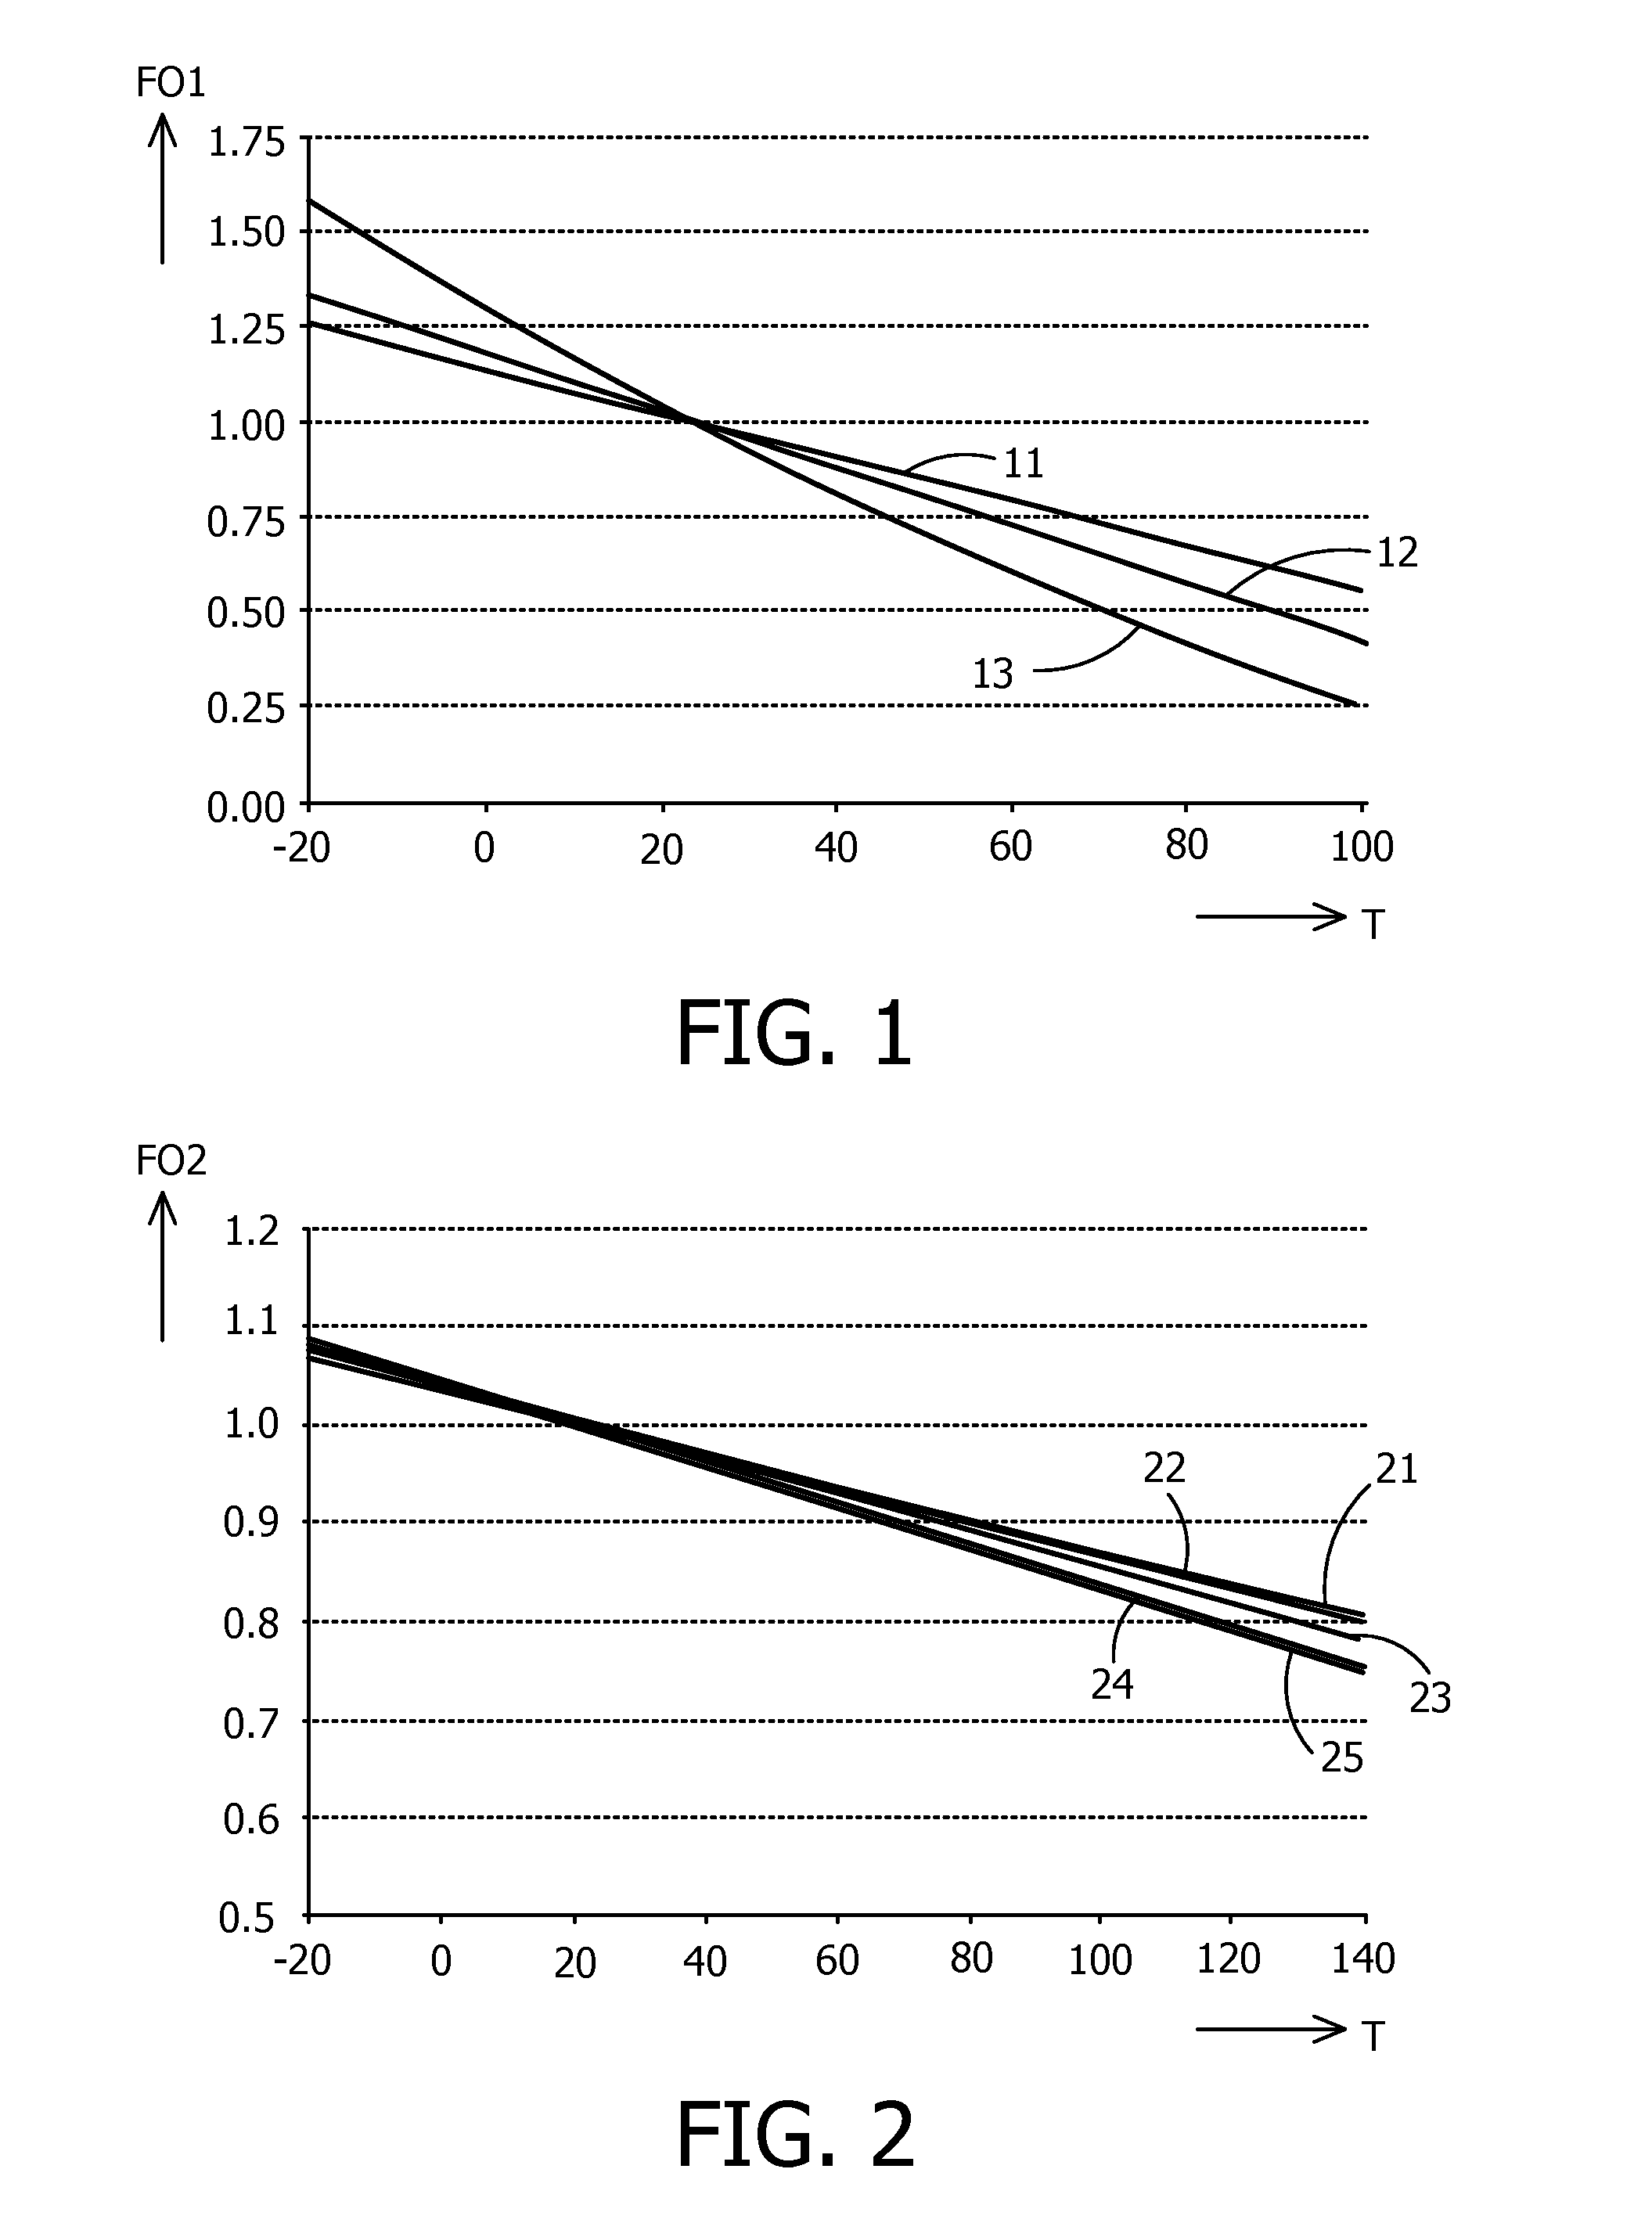 LED lighting device with temperature dependent output stabilizer